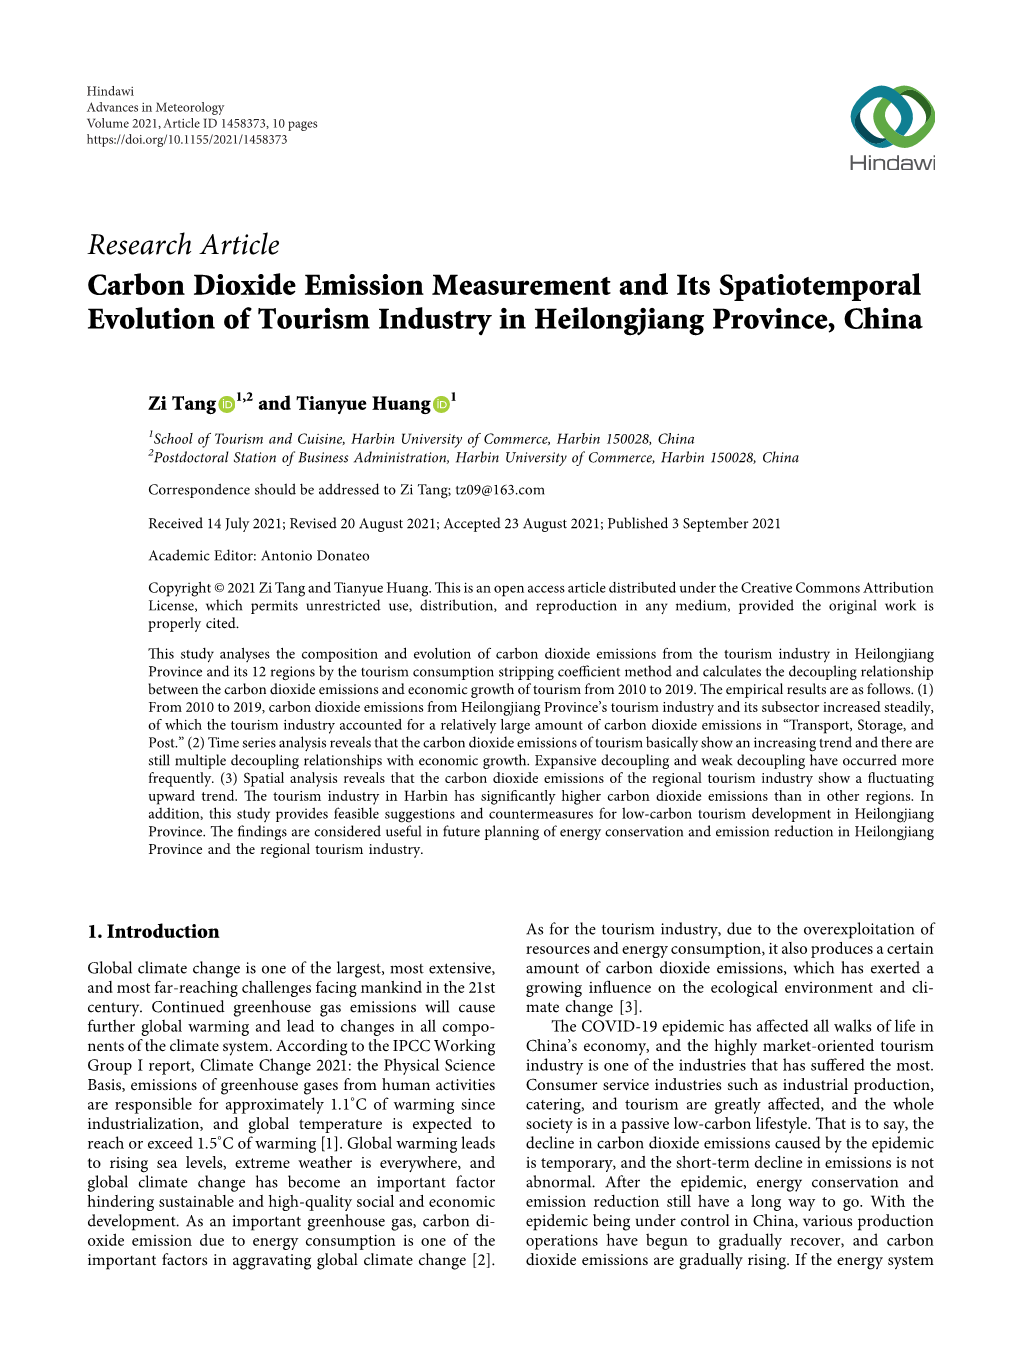 Research Article Carbon Dioxide Emission Measurement and Its Spatiotemporal Evolution of Tourism Industry in Heilongjiang Province, China